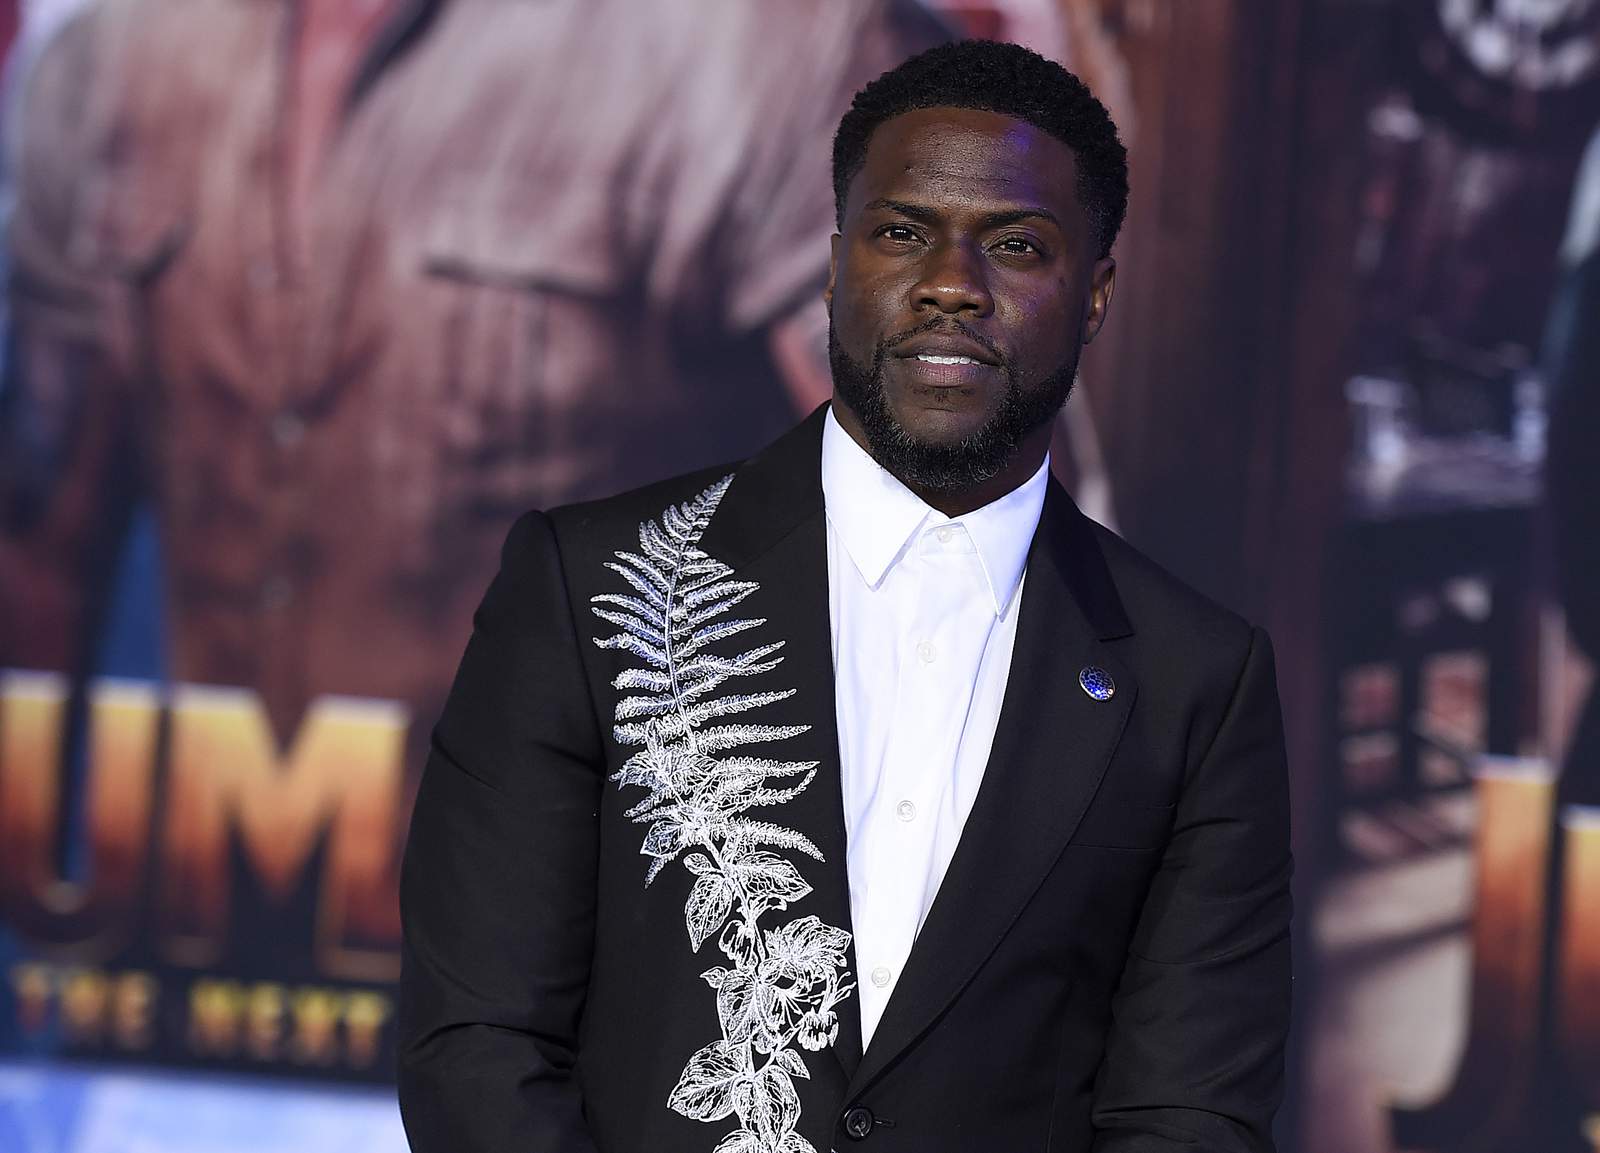 Kevin Hart to host famed telethon long hosted by Jerry Lewis